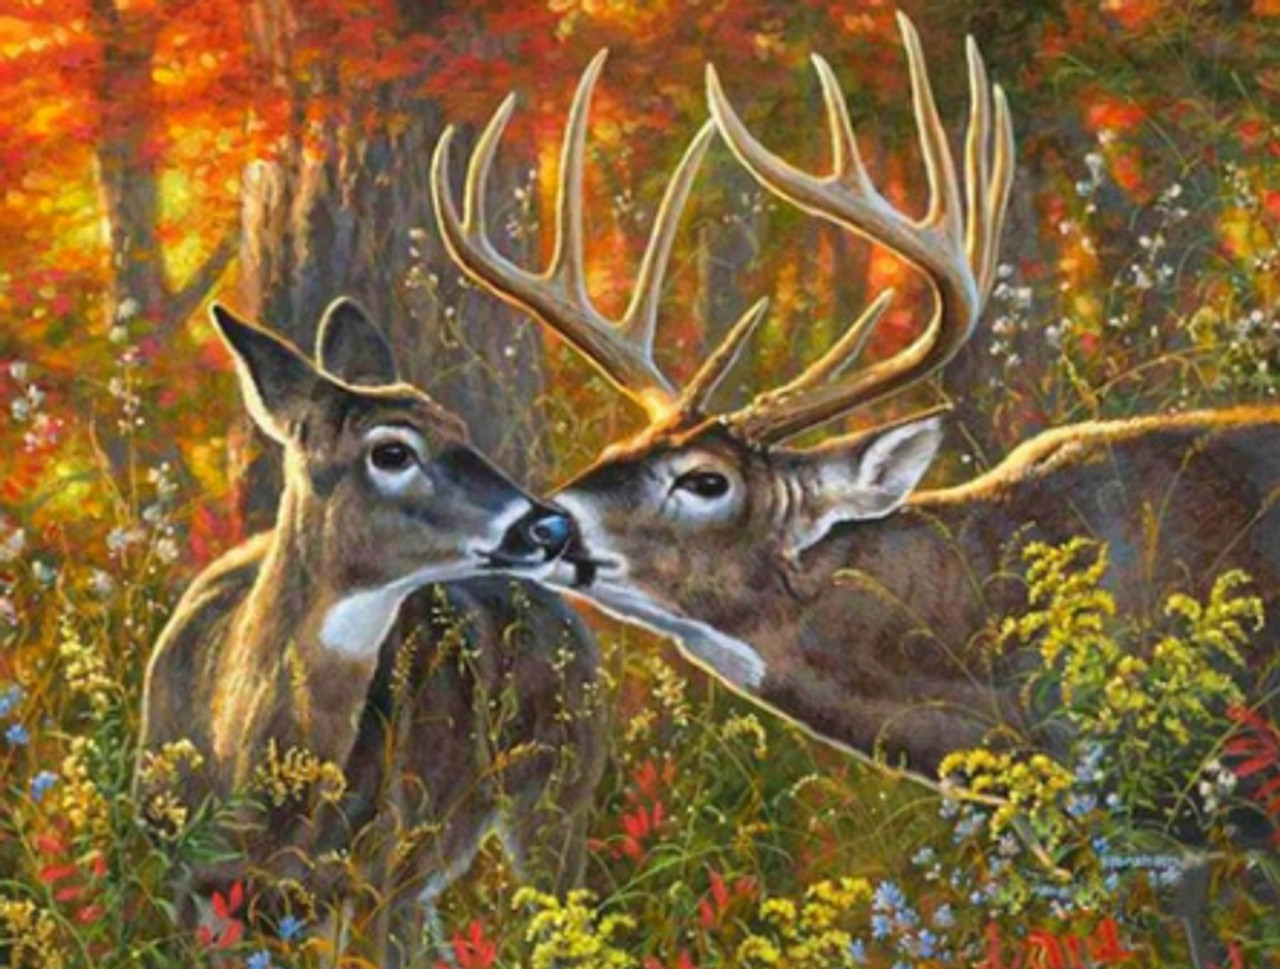 Snuqevc 5D DIY Animals Diamond Painting - Deer with Flower Adult Diamond  Painting Kits Embroidery Crystal Kit, Wall Decor Home Decor - 8X12inch  Mural